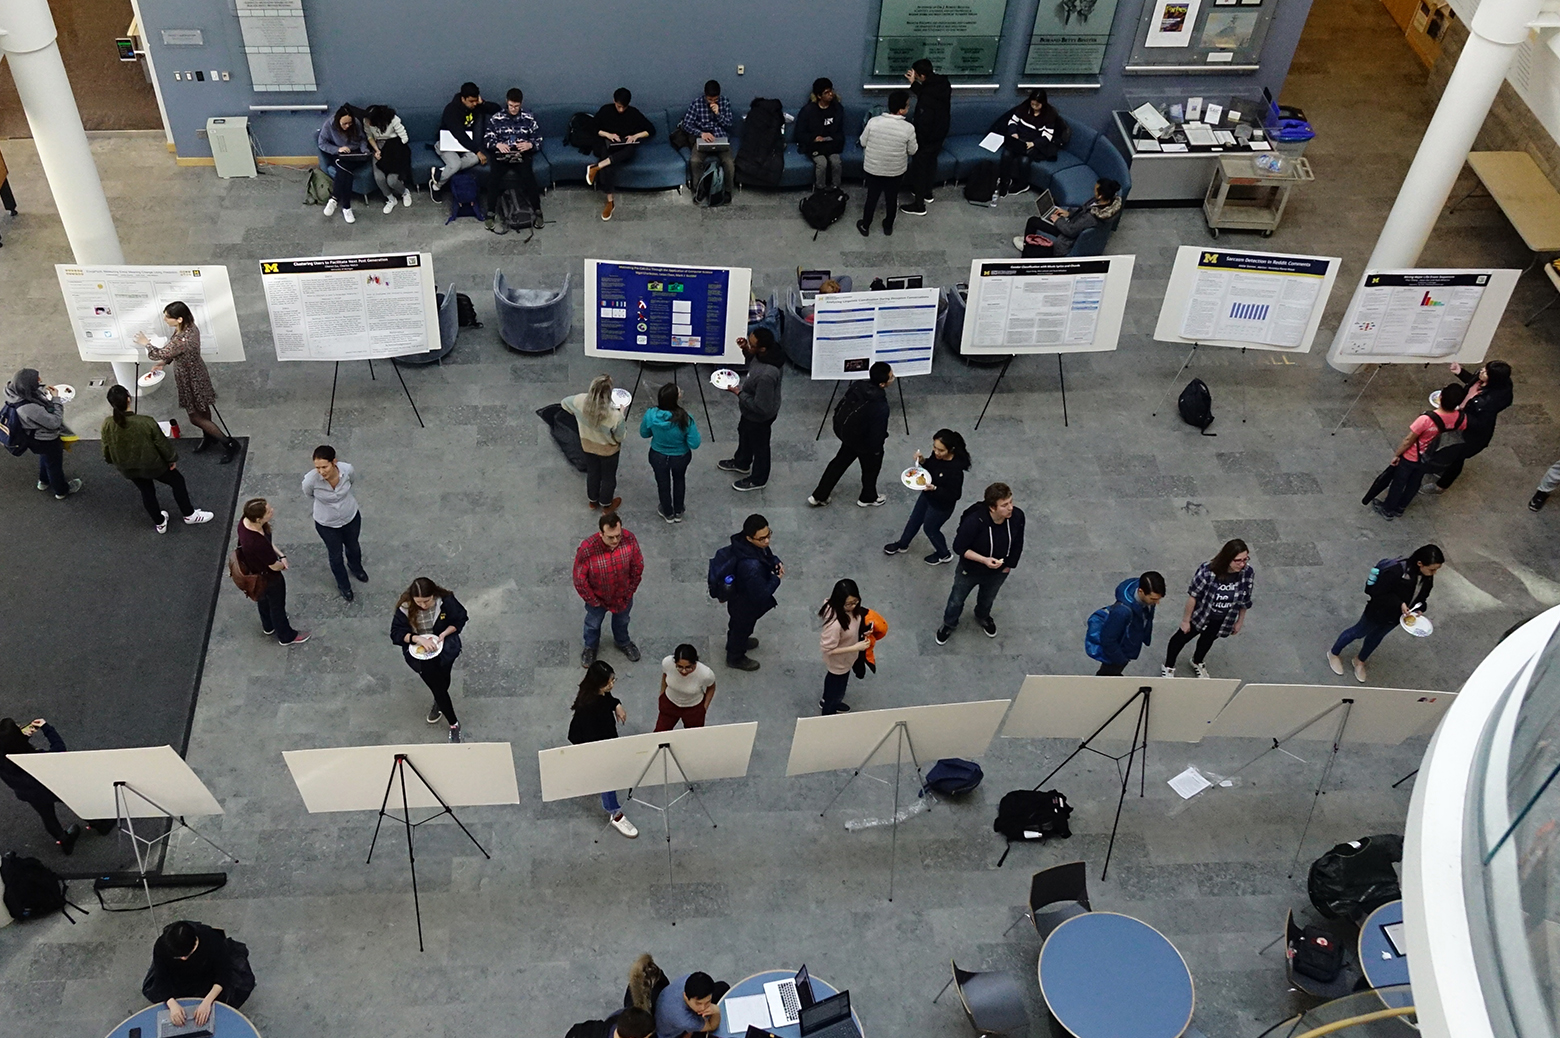 Career research poster session